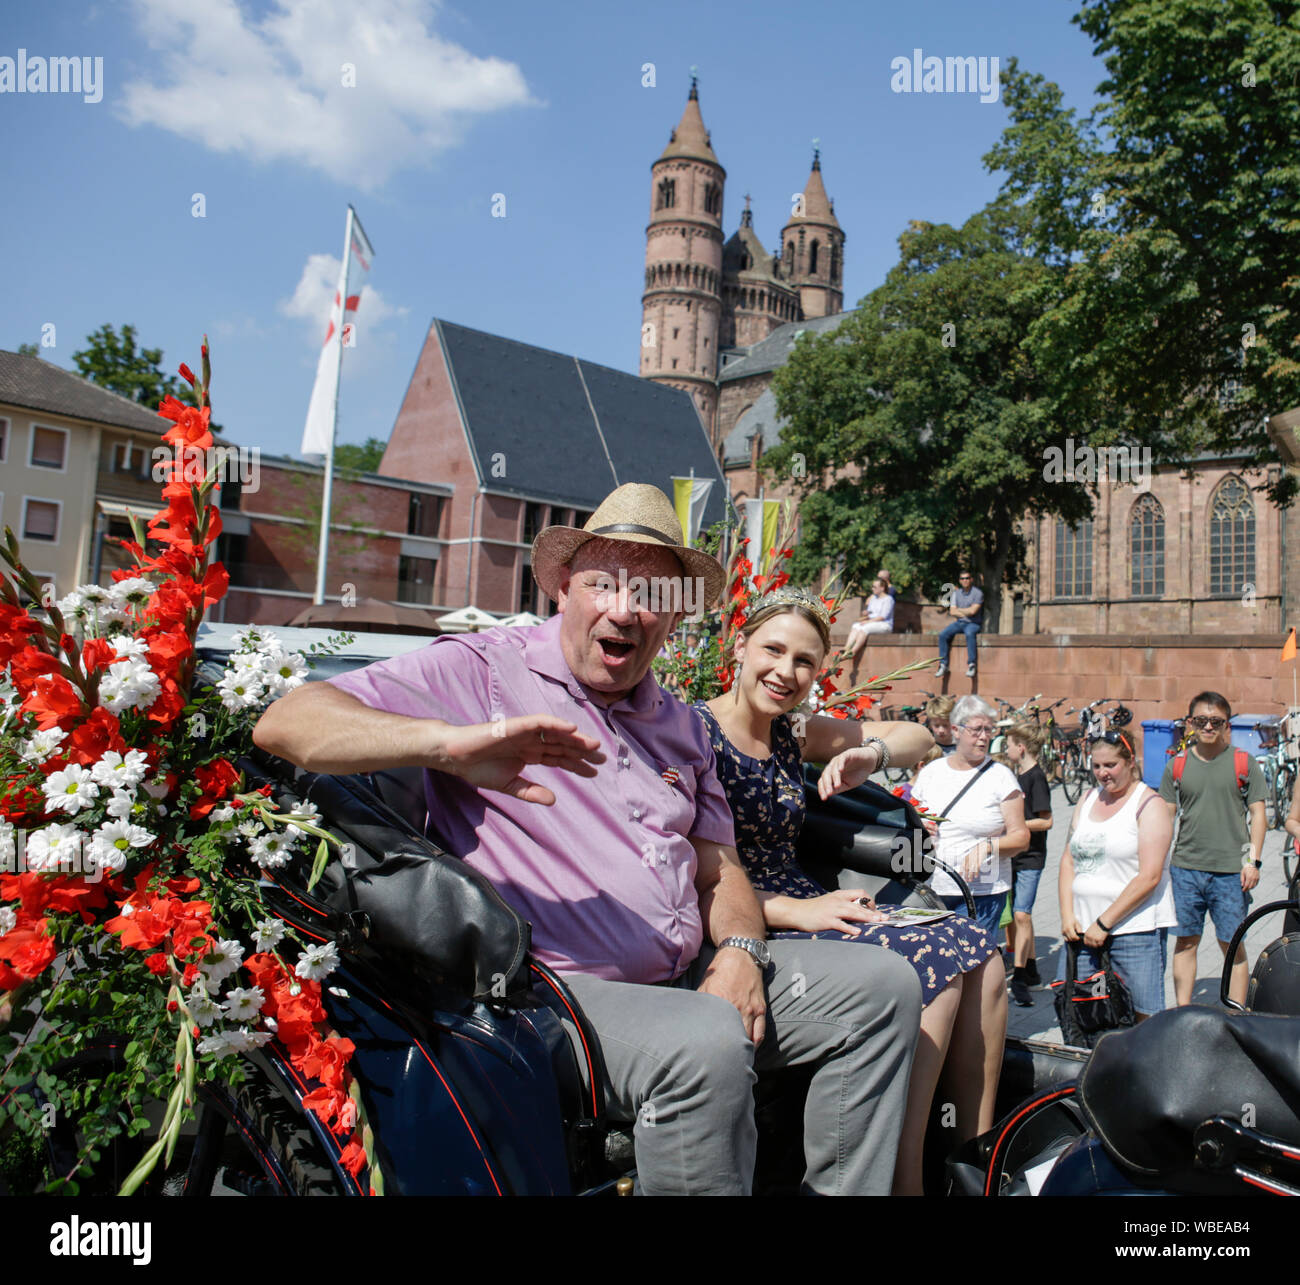 Worms, Germany. 25th August 2019. The Lord Mayor of Worms, Adolf Kessel, and the Rhine-Hessian wine queen Anna Göhring ride in an open horse-drawn carriage in the parade, waving to the crowd. The first highlight of the 2019 Backfischfest was the big parade through the city of Worms with over 70 groups and floats. Community groups, music groups and businesses from Worms and further afield took part. Stock Photo